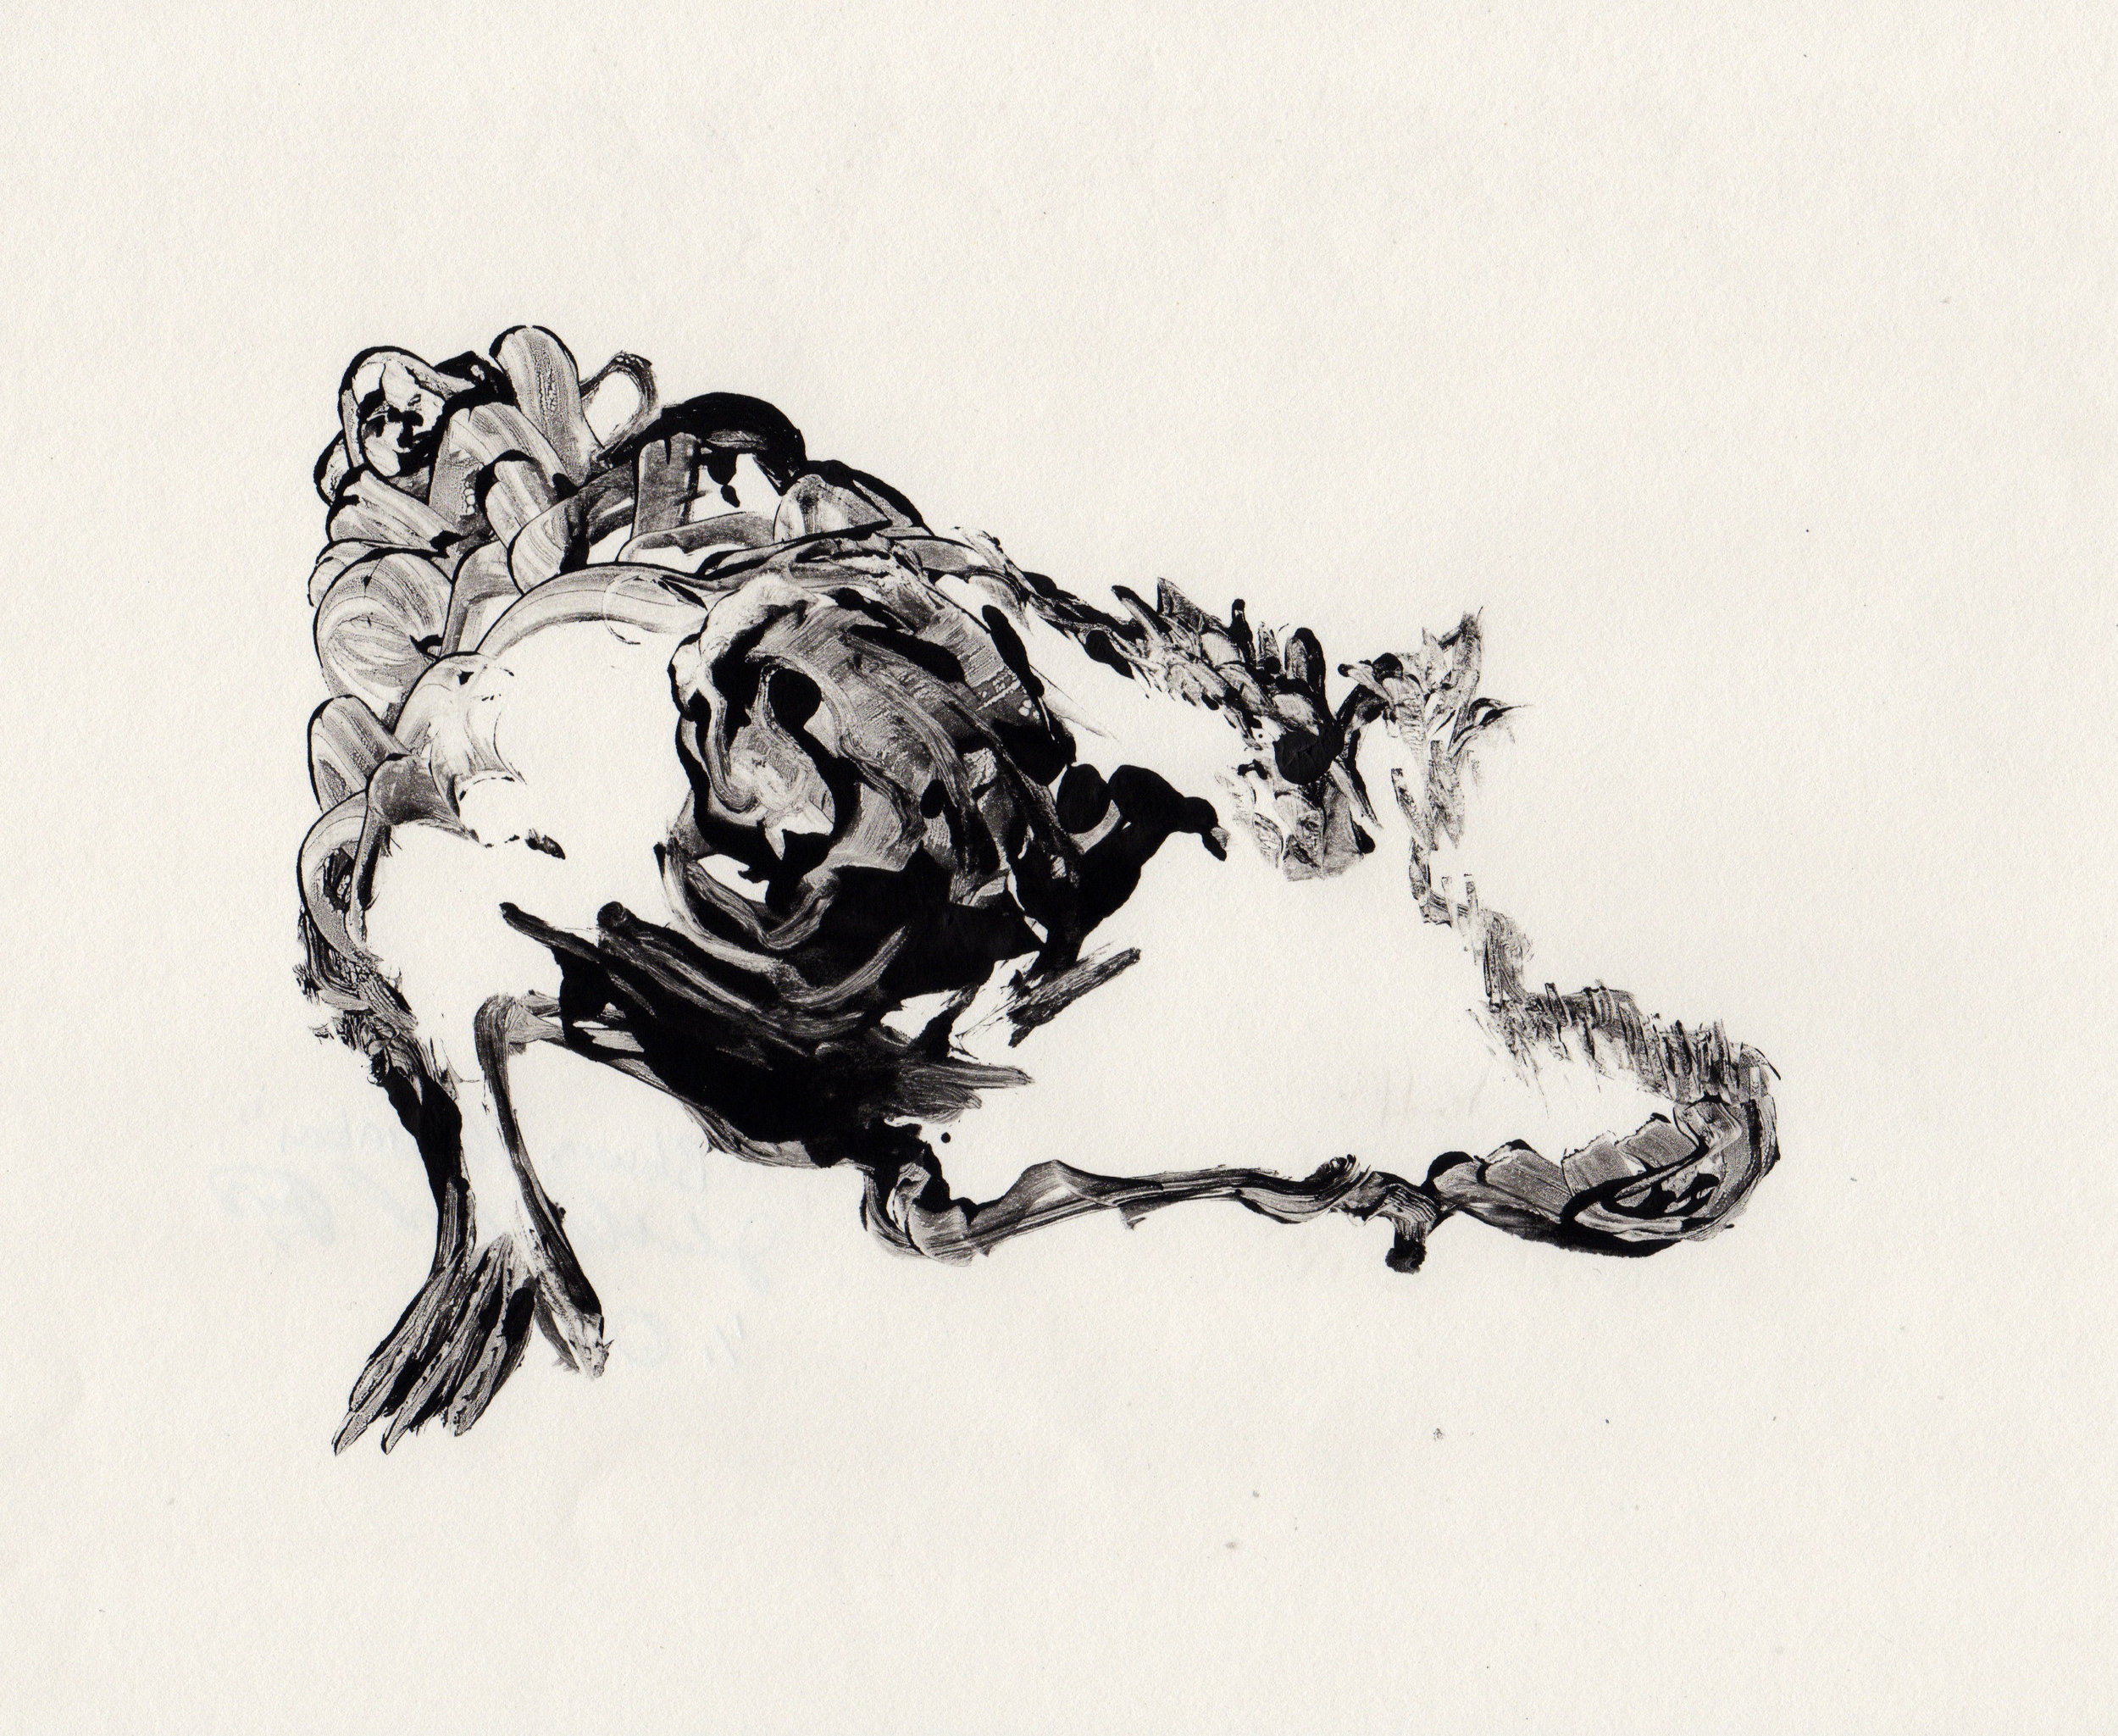 Blowing The Embers, 2014, gelatin monotype, 10x9 inches